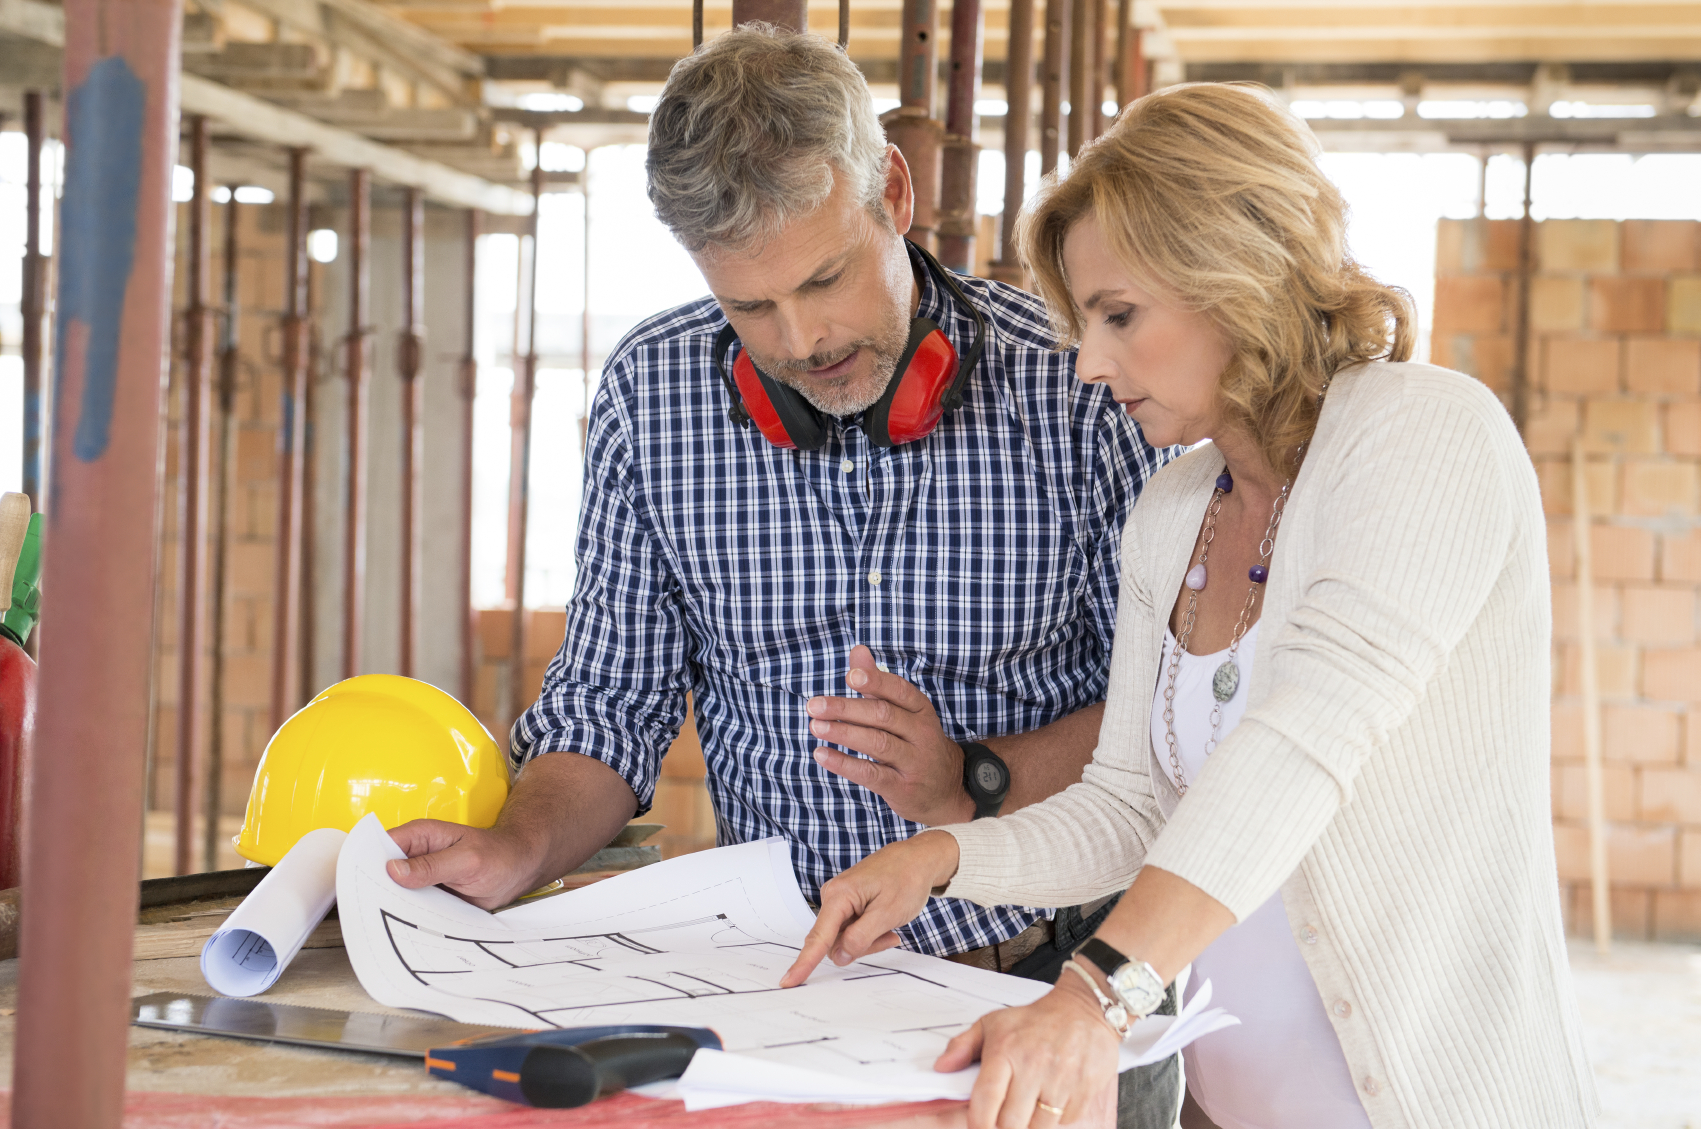 Portrait Of Male Architect And Mature Woman Discussing Plan On Blueprint At Construction Site